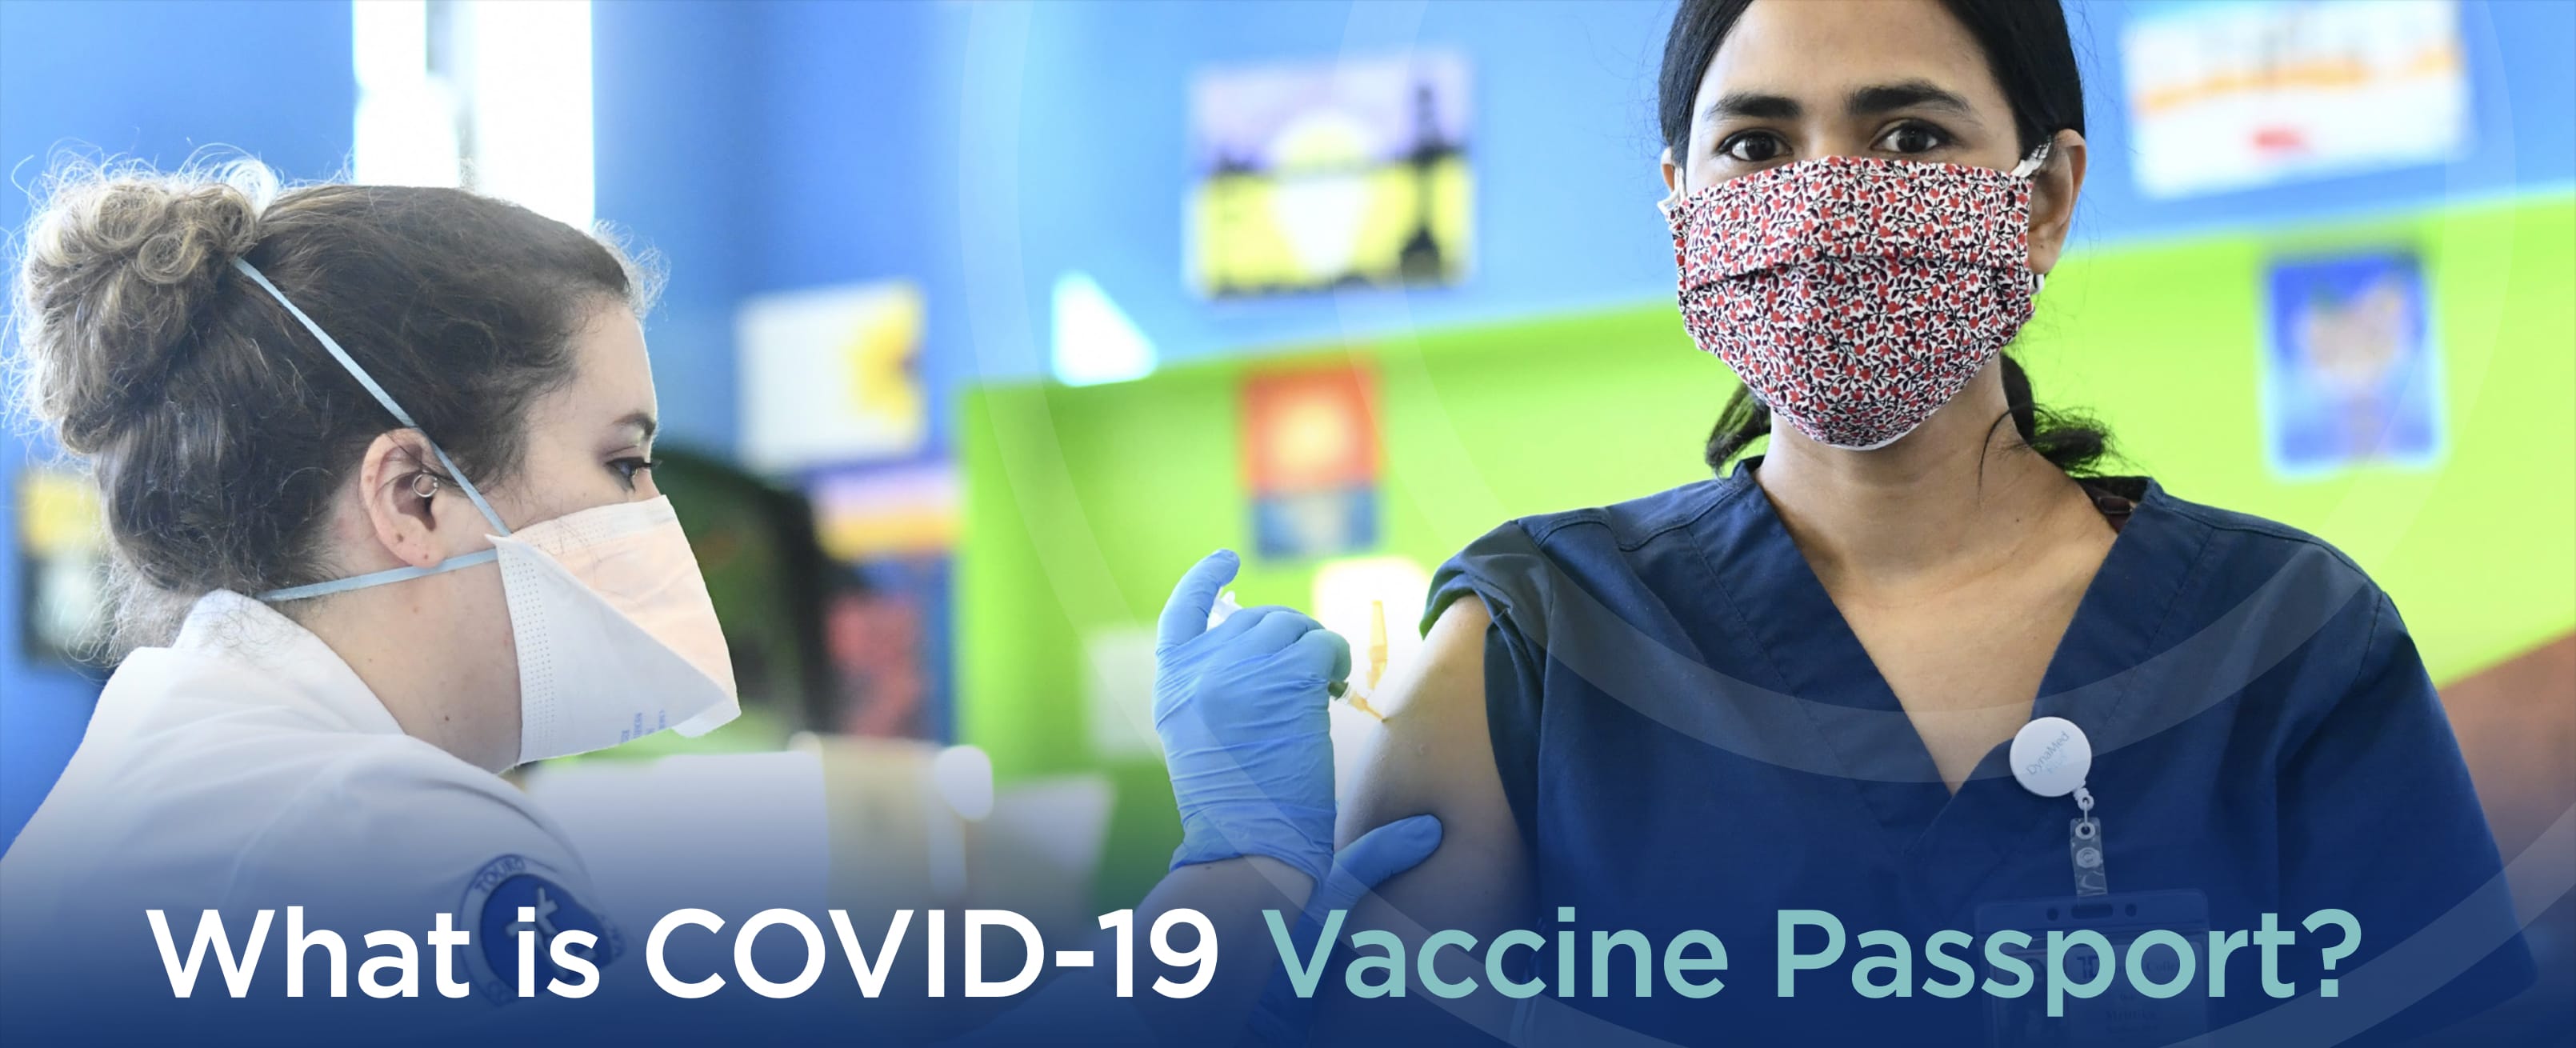 What is a covid-19 vaccine passport